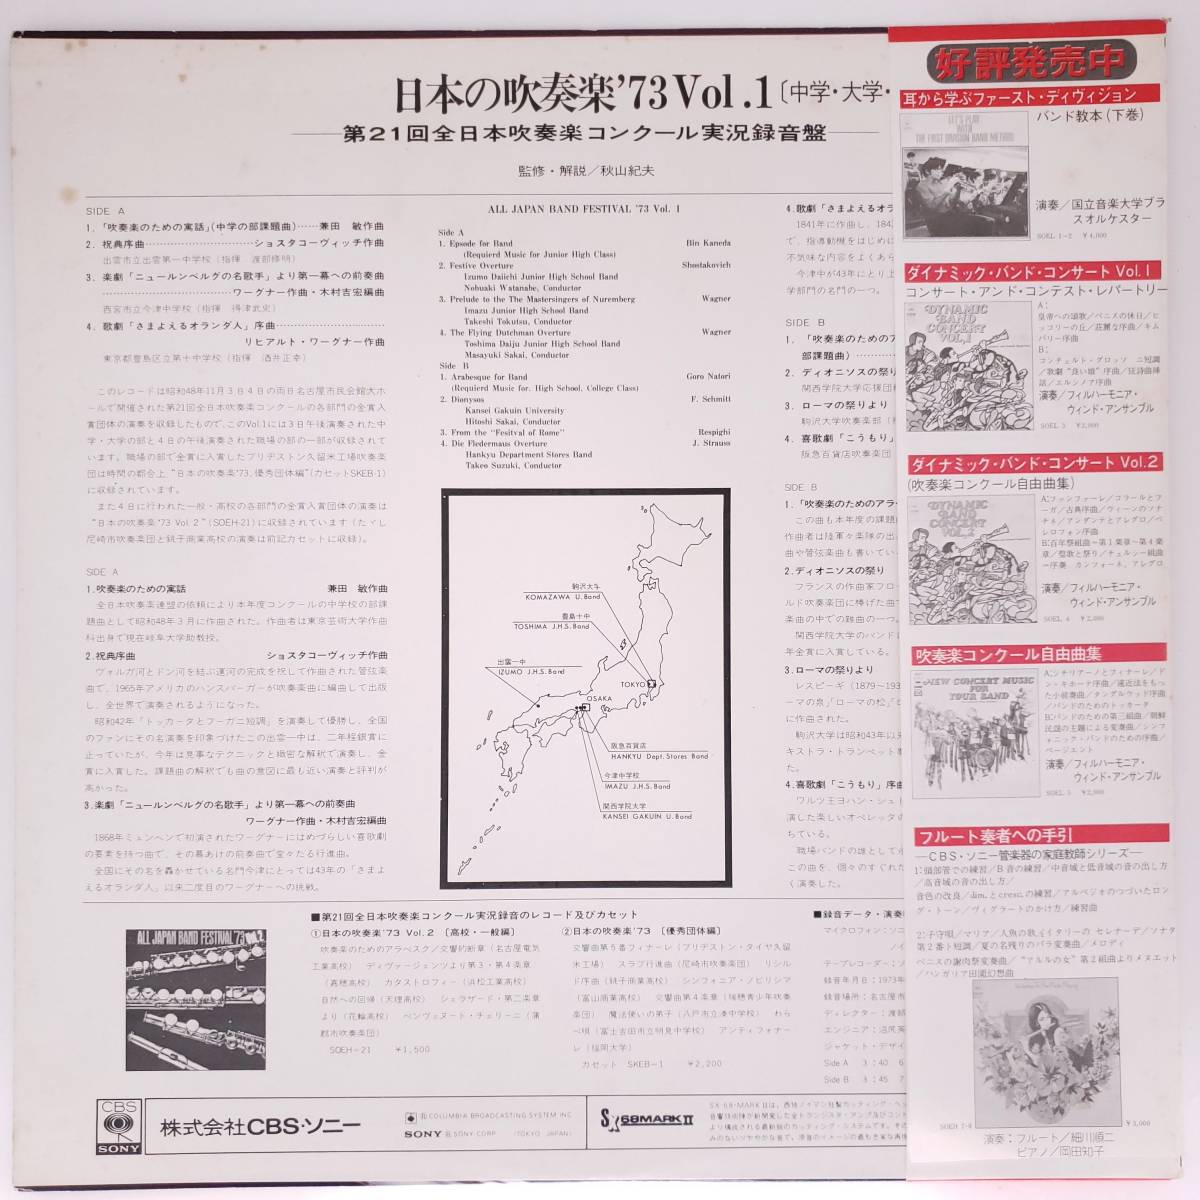  good record shop *LP** japanese wind instrumental music *1973 Vol.Ⅰ* no. 21 times all Japan wind instrumental music navy blue cool real . recording record { middle .* university * job place compilation }*C10158